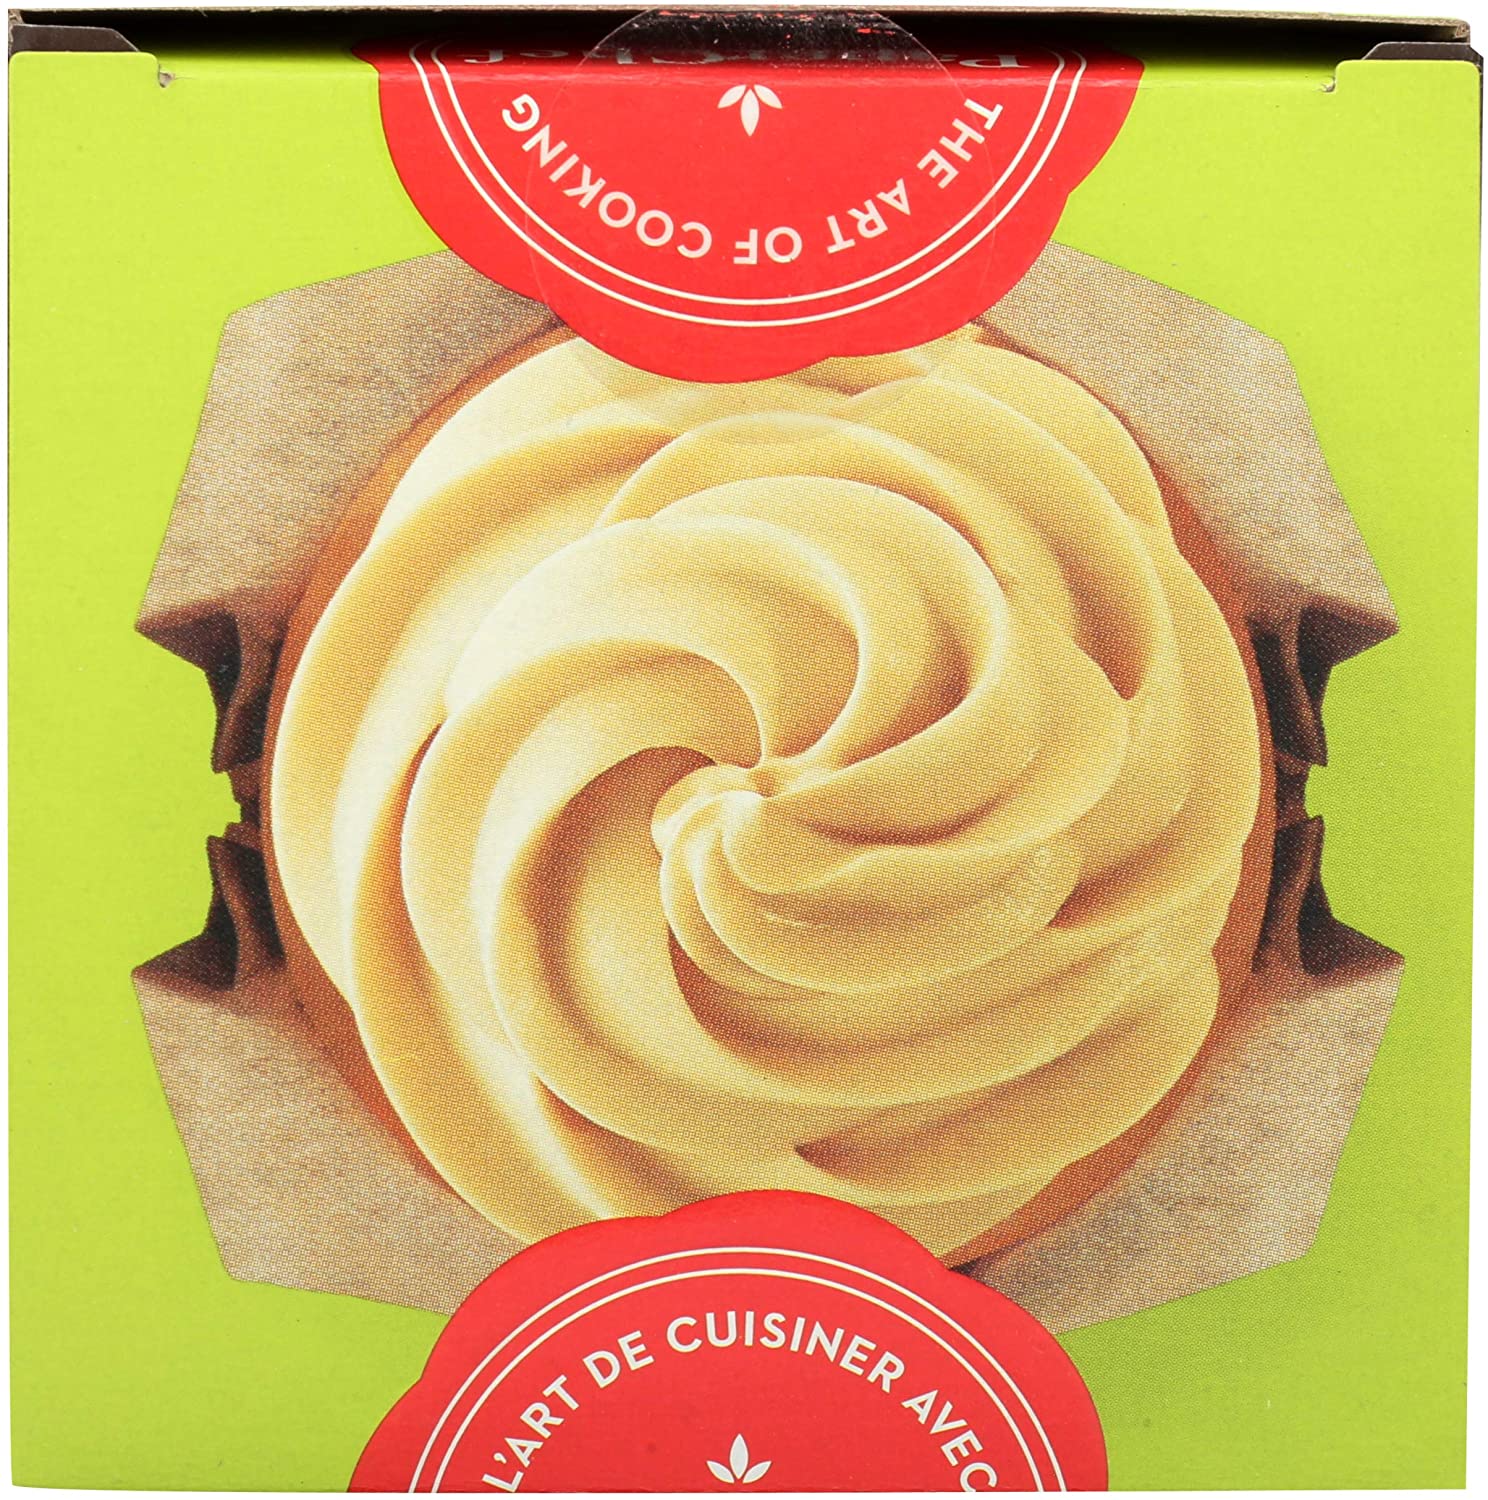 PaperChef Tulip Baking Cups (Pack of two)